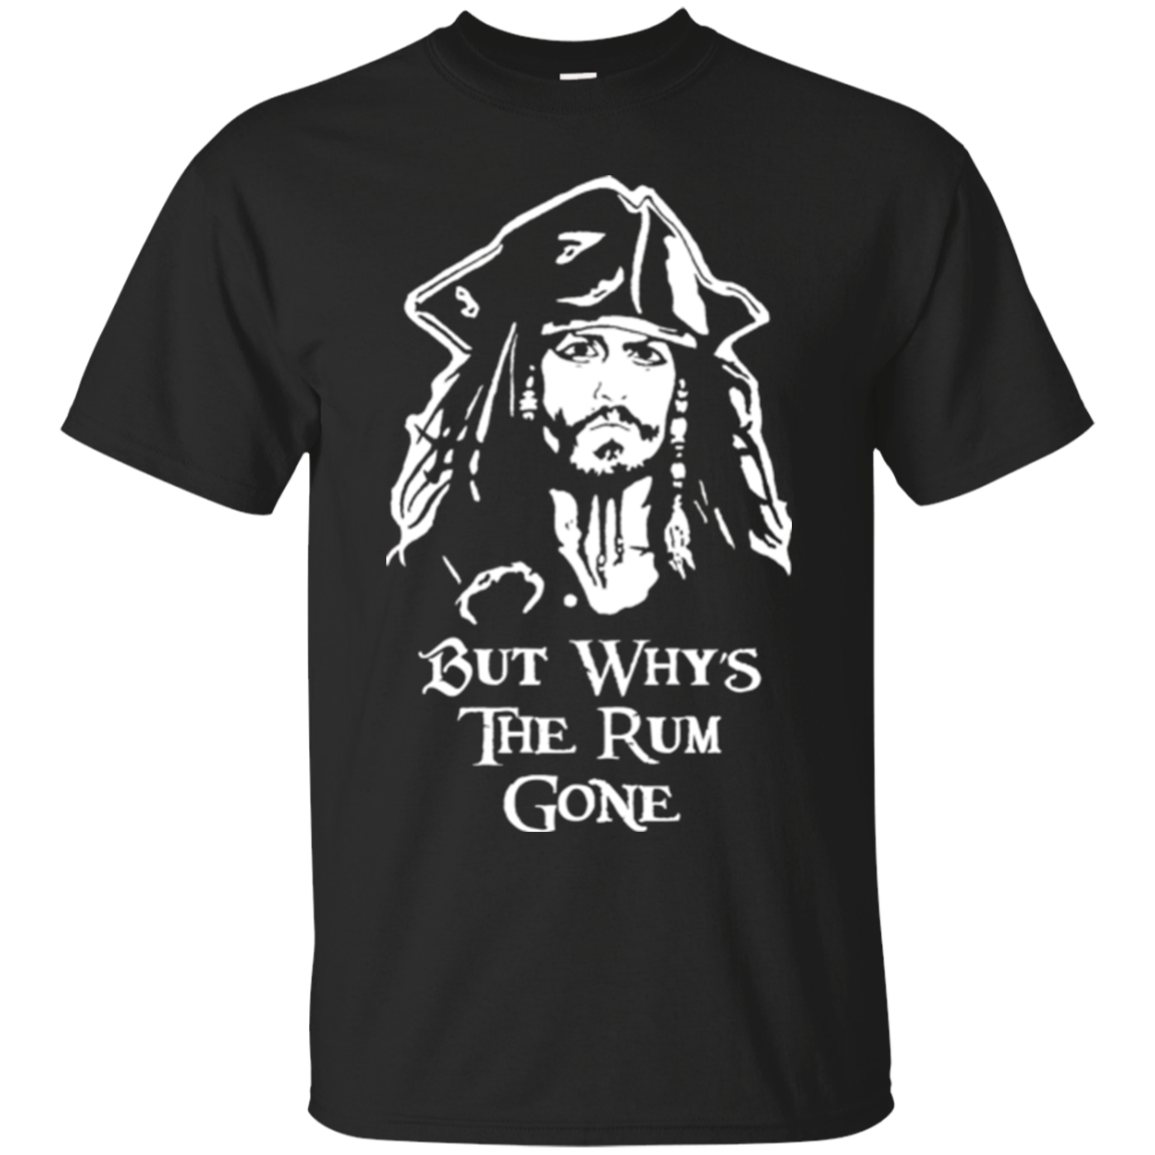 Pirates Of The Caribbean Shirts Jack Sparrow Why's The Rum Gone - Amyna